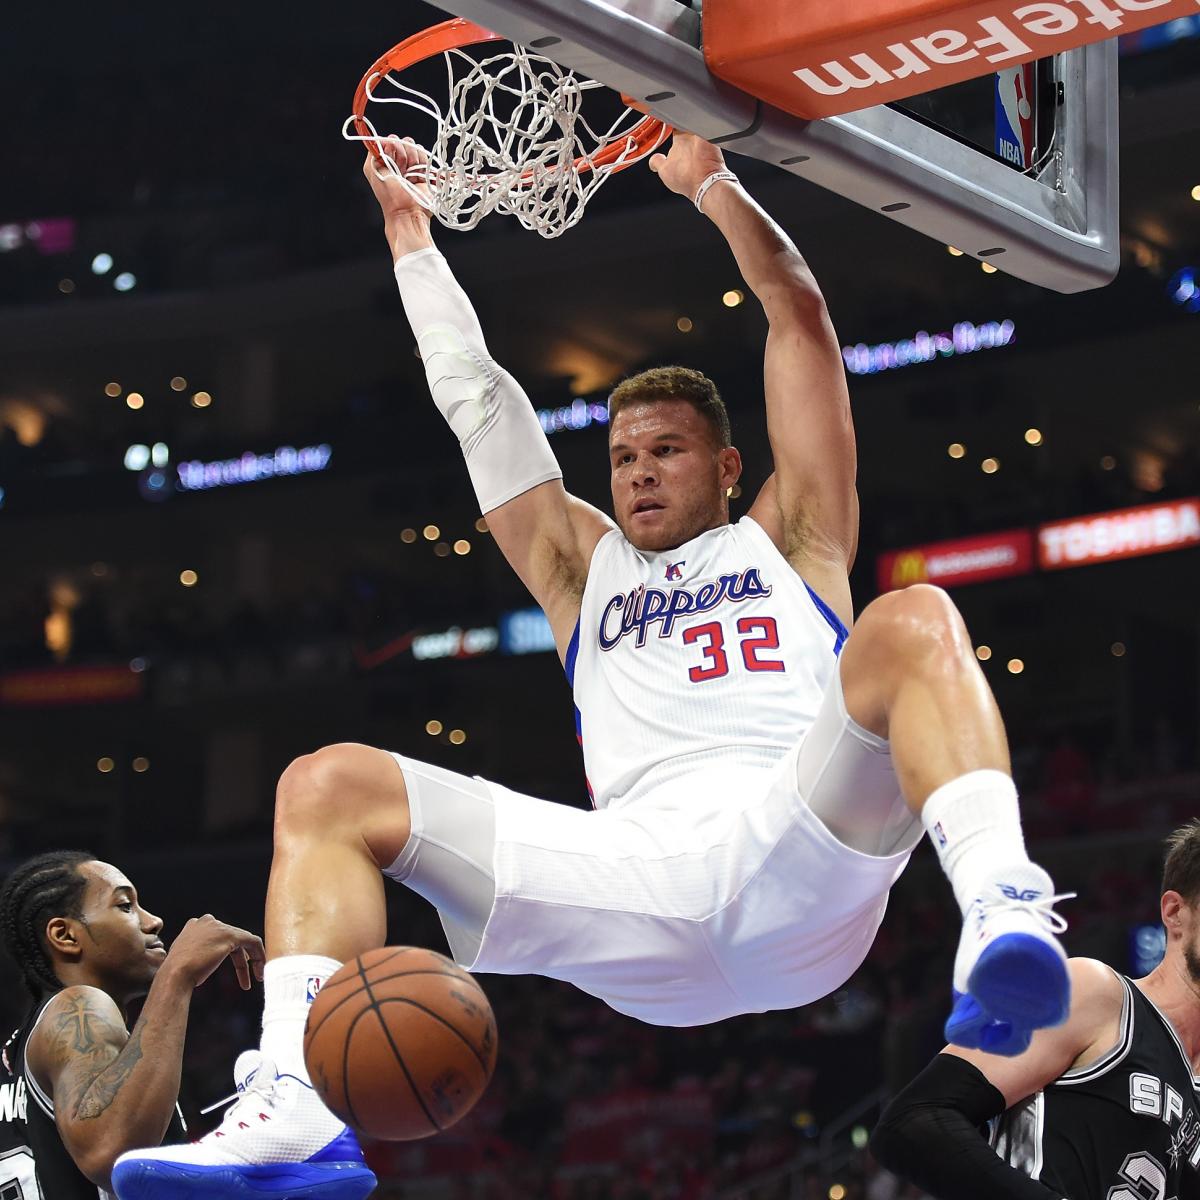 See Blake Griffin react to his 2012 USA Basketball practice dunk video